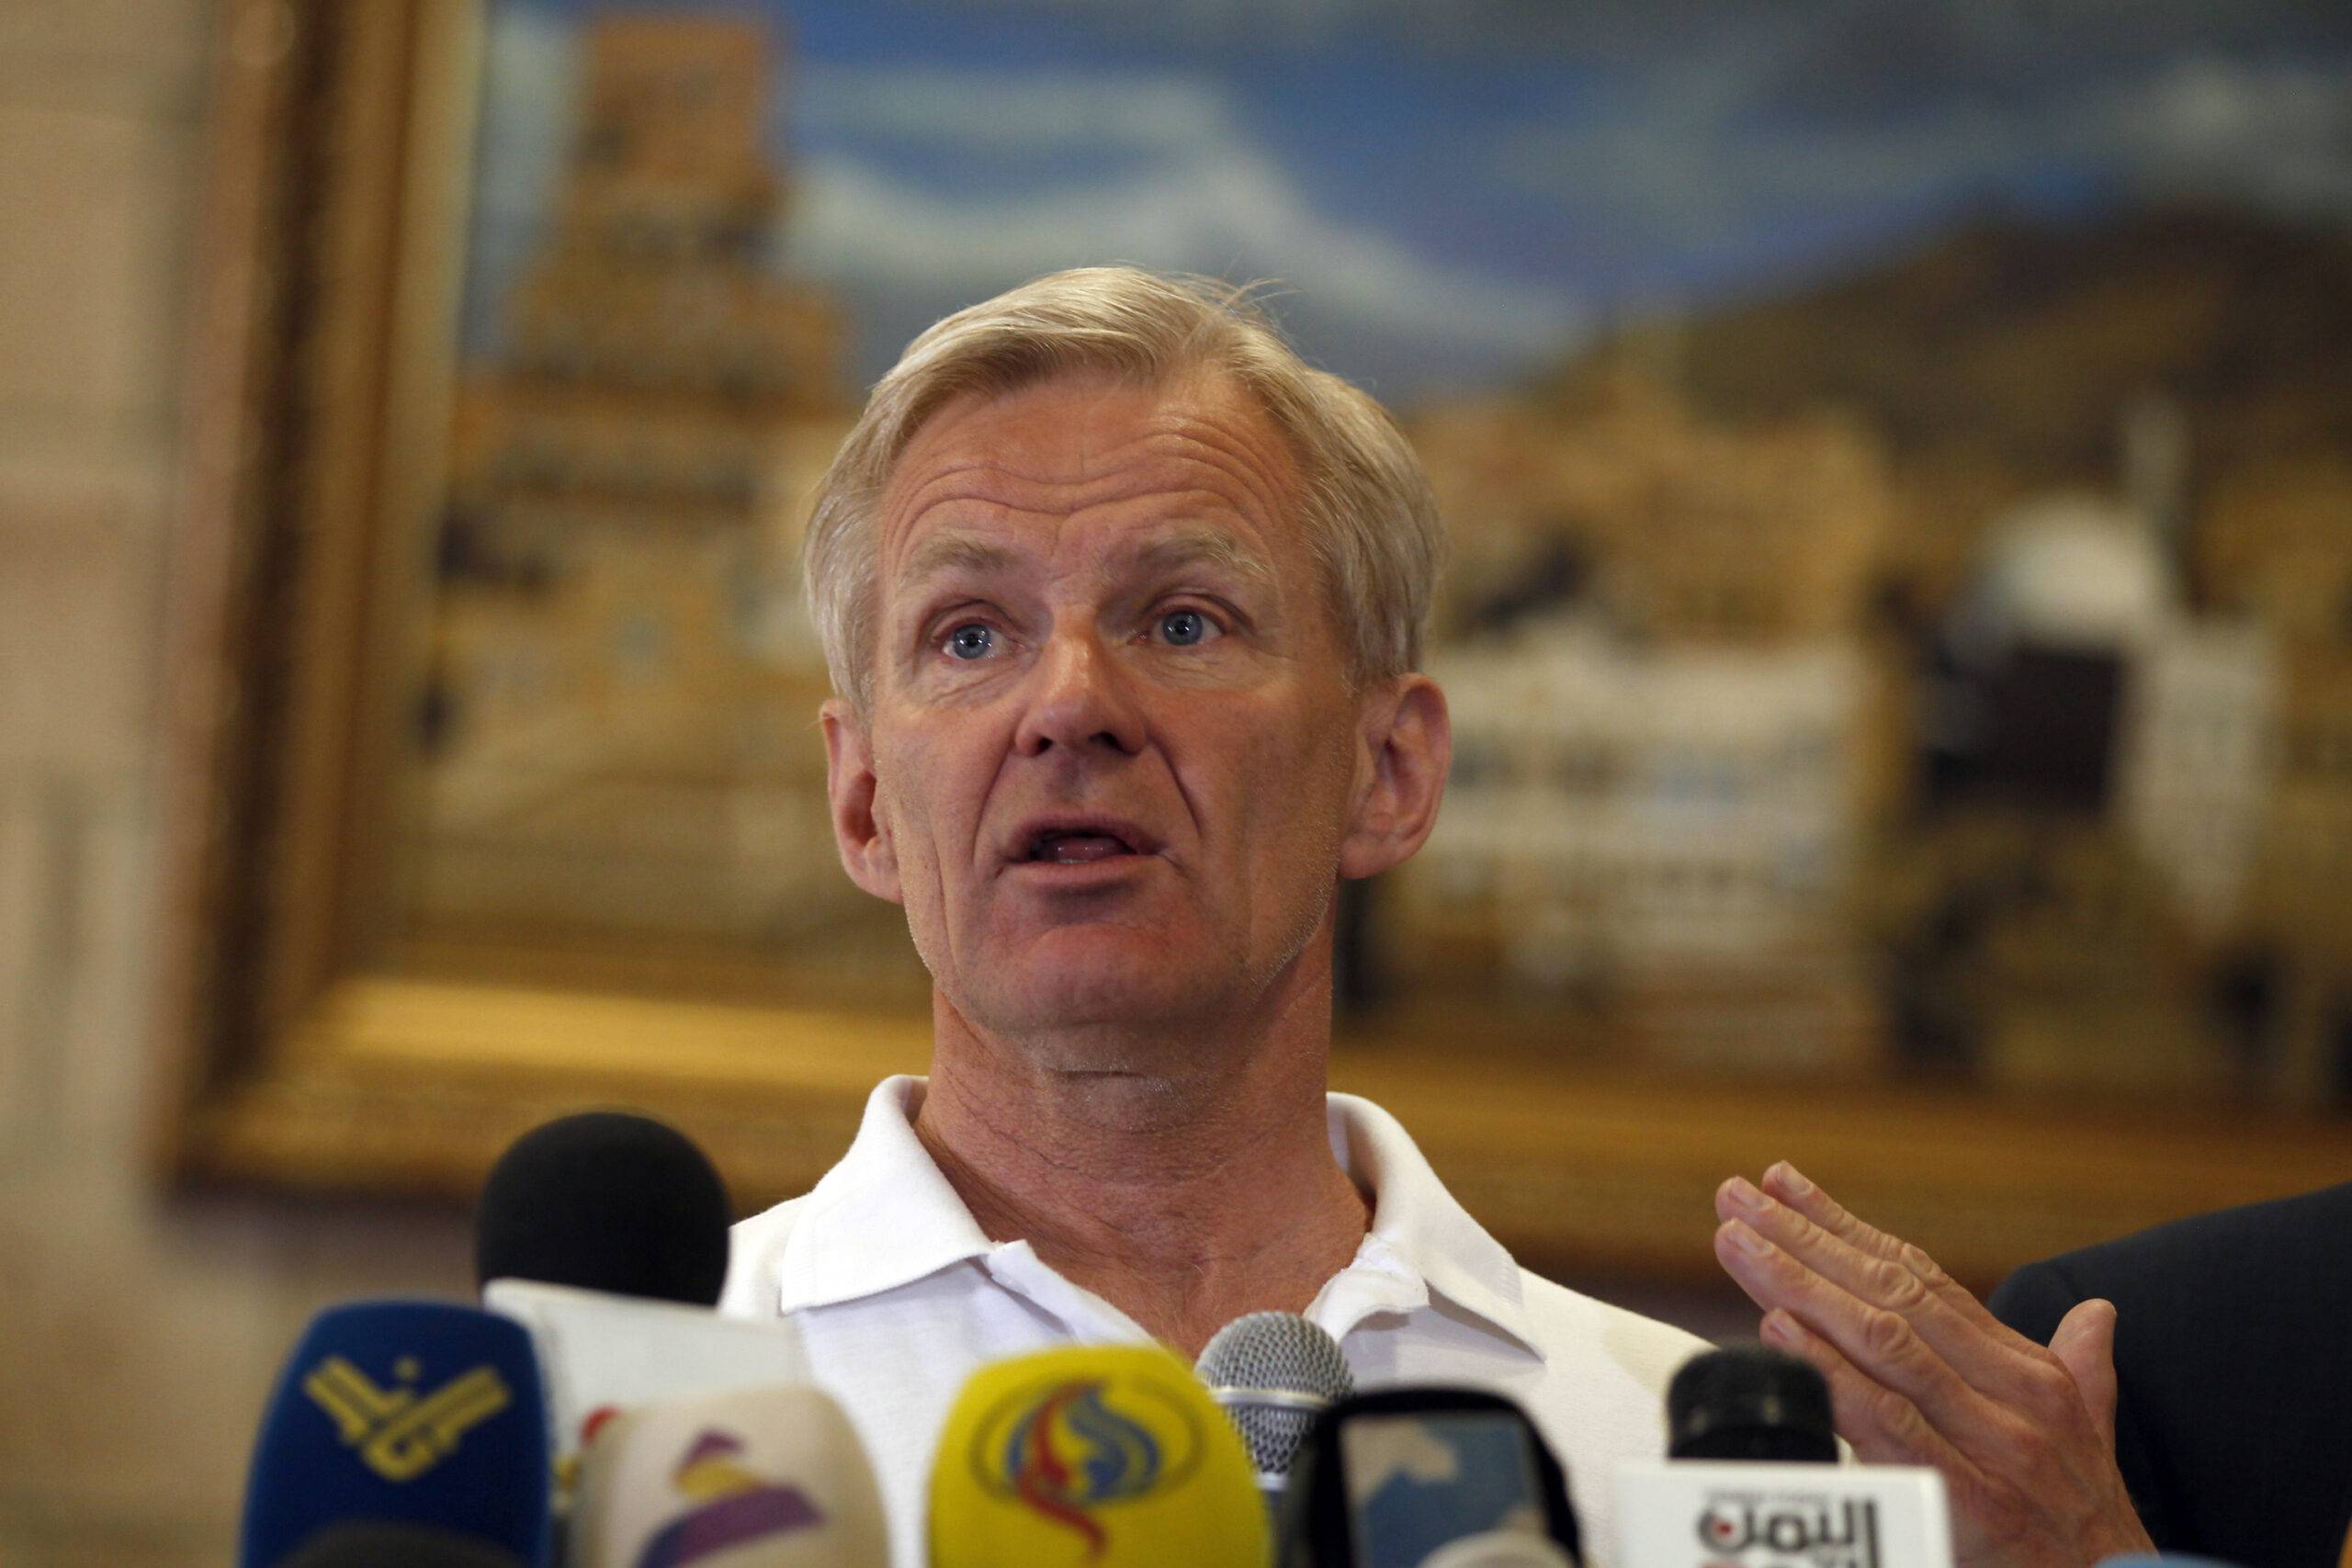 Jan Egeland, Secretary General of the Norwegian Refugee Council gestures during a press conference, in which he spoke about the suffering caused by the war in Yemen more than two years after a Saudi-led intervention, on May 3, 2017 ahead of his departure at Sanaa international airport [Mohammed Huwais/AFP via Getty Images]